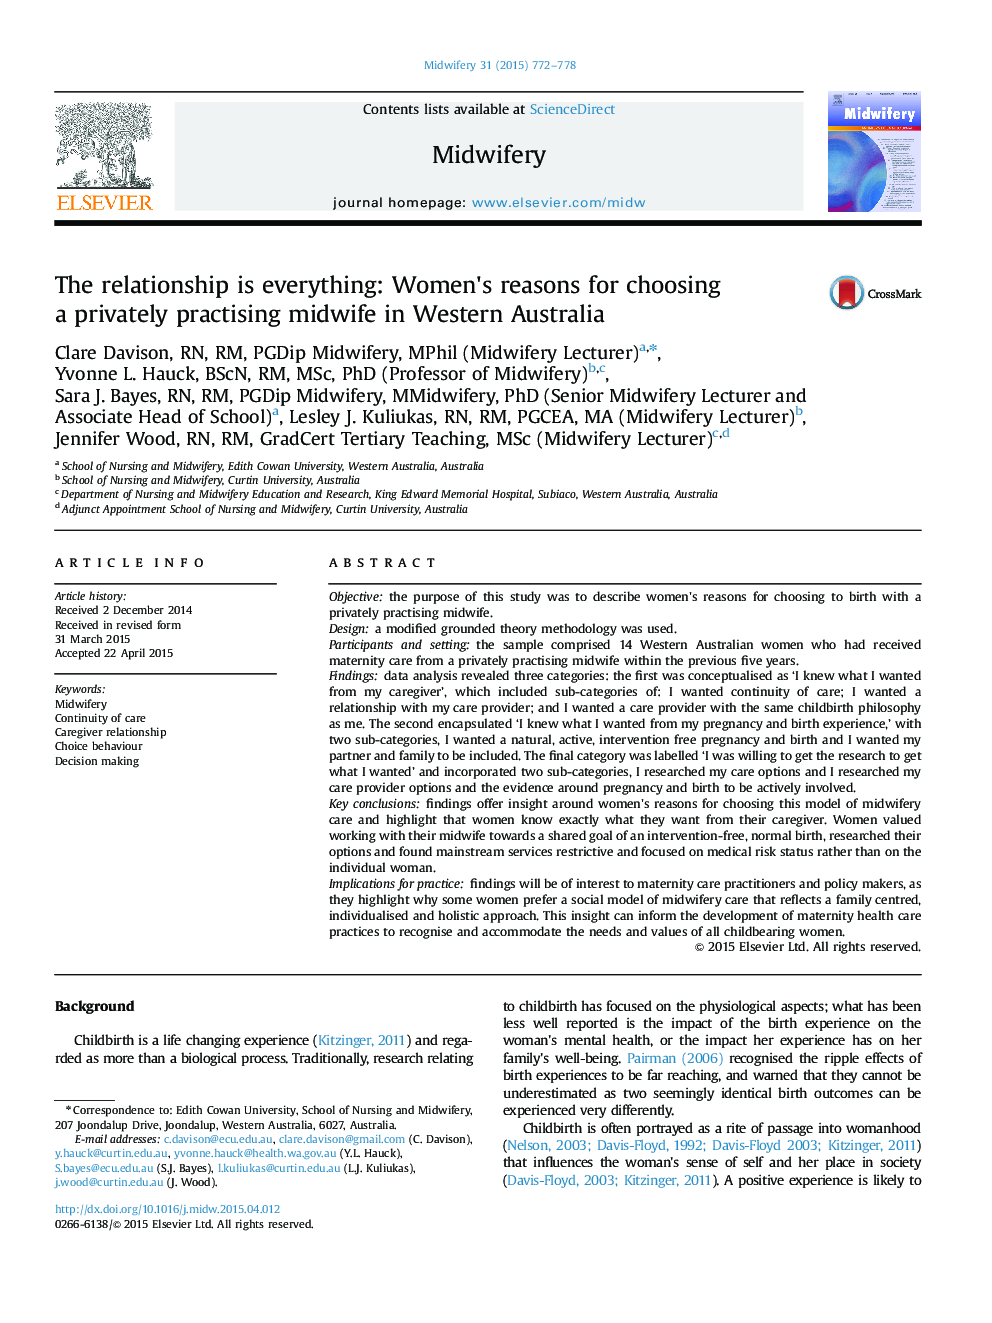 The relationship is everything: Women׳s reasons for choosing a privately practising midwife in Western Australia